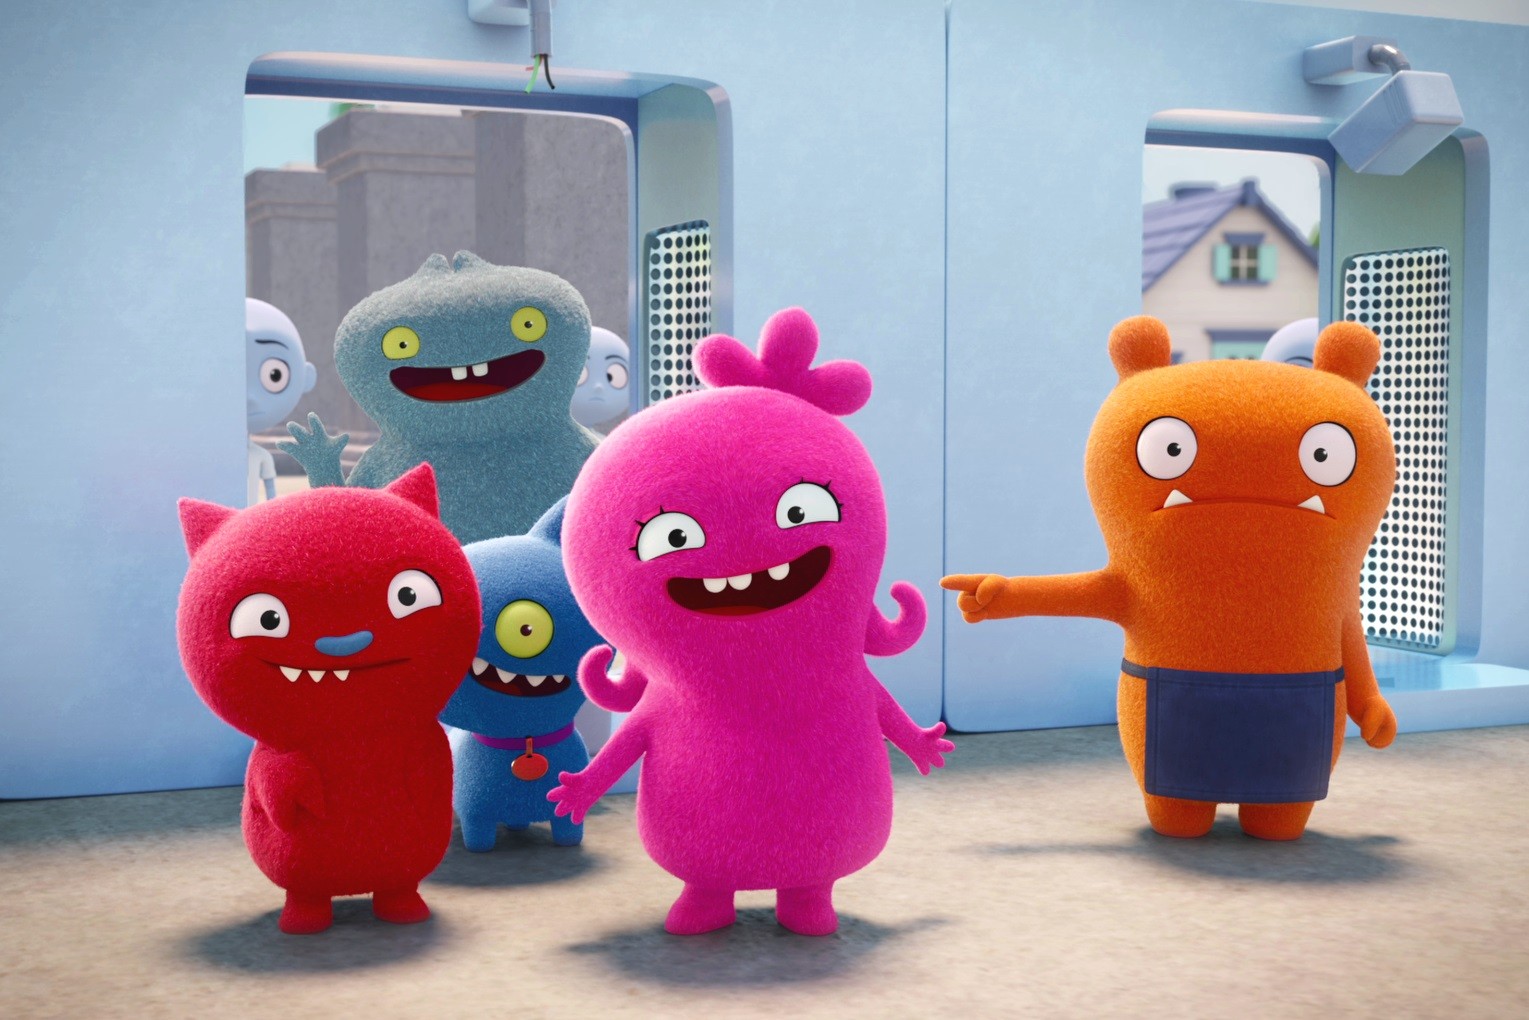 Moxy (centre, voiced by Kelly Clarkson) and friends in a still from UglyDolls (category: I), directed by Kelly Asbury.